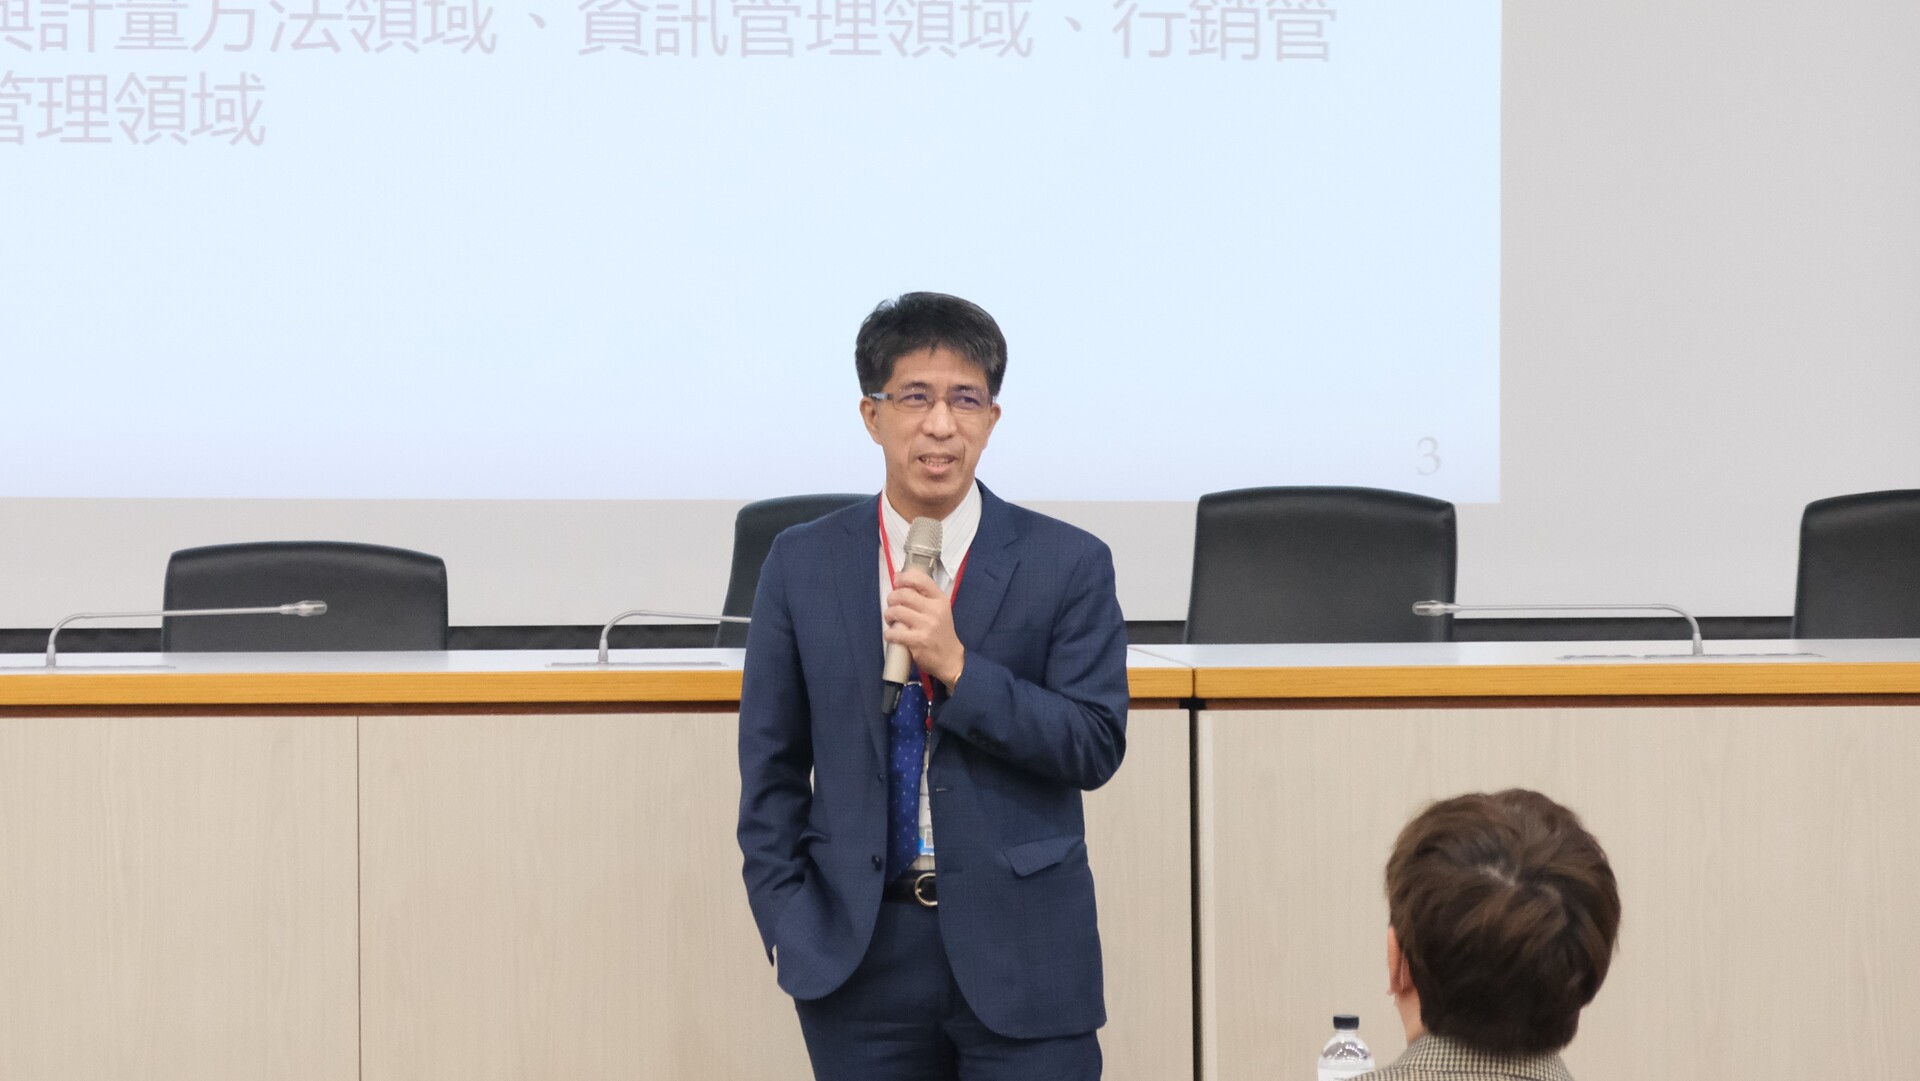 Professor Chih-Ping Wei of Information Management Department of National Taiwan University remembered MOE Lifetime Chair Professor Ting-Peng Liang’s contribution to the field of management.